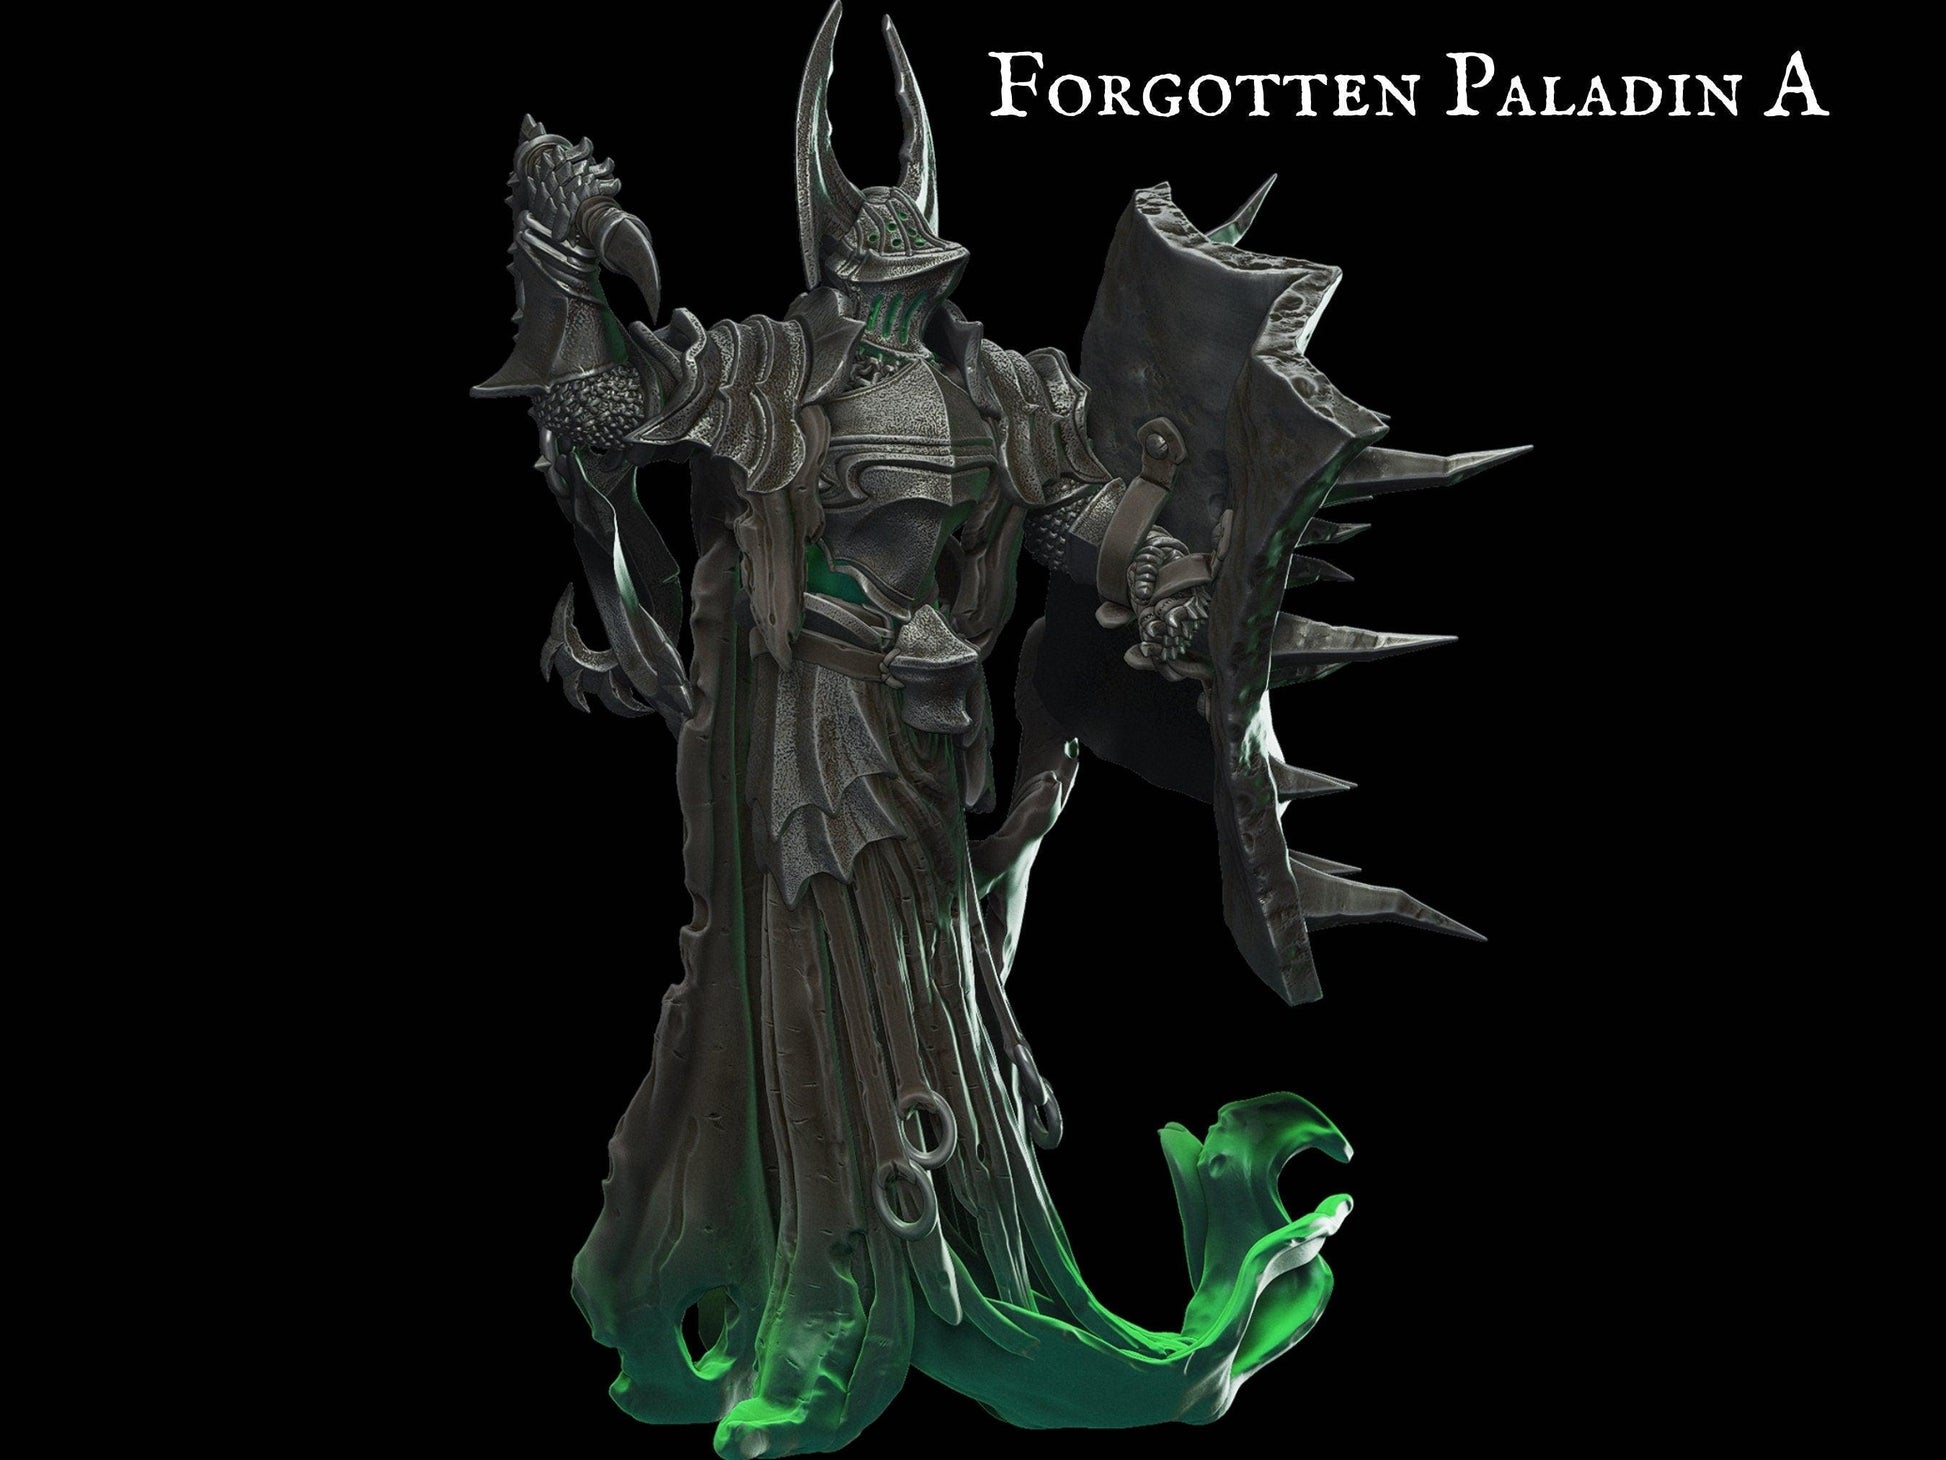 Forgotten Paladin Miniature Undead Miniature 28mm scale Tabletop gaming DnD Miniature Dungeons and Dragons dnd 5e dungeon master gift demon - Plague Miniatures shop for DnD Miniatures